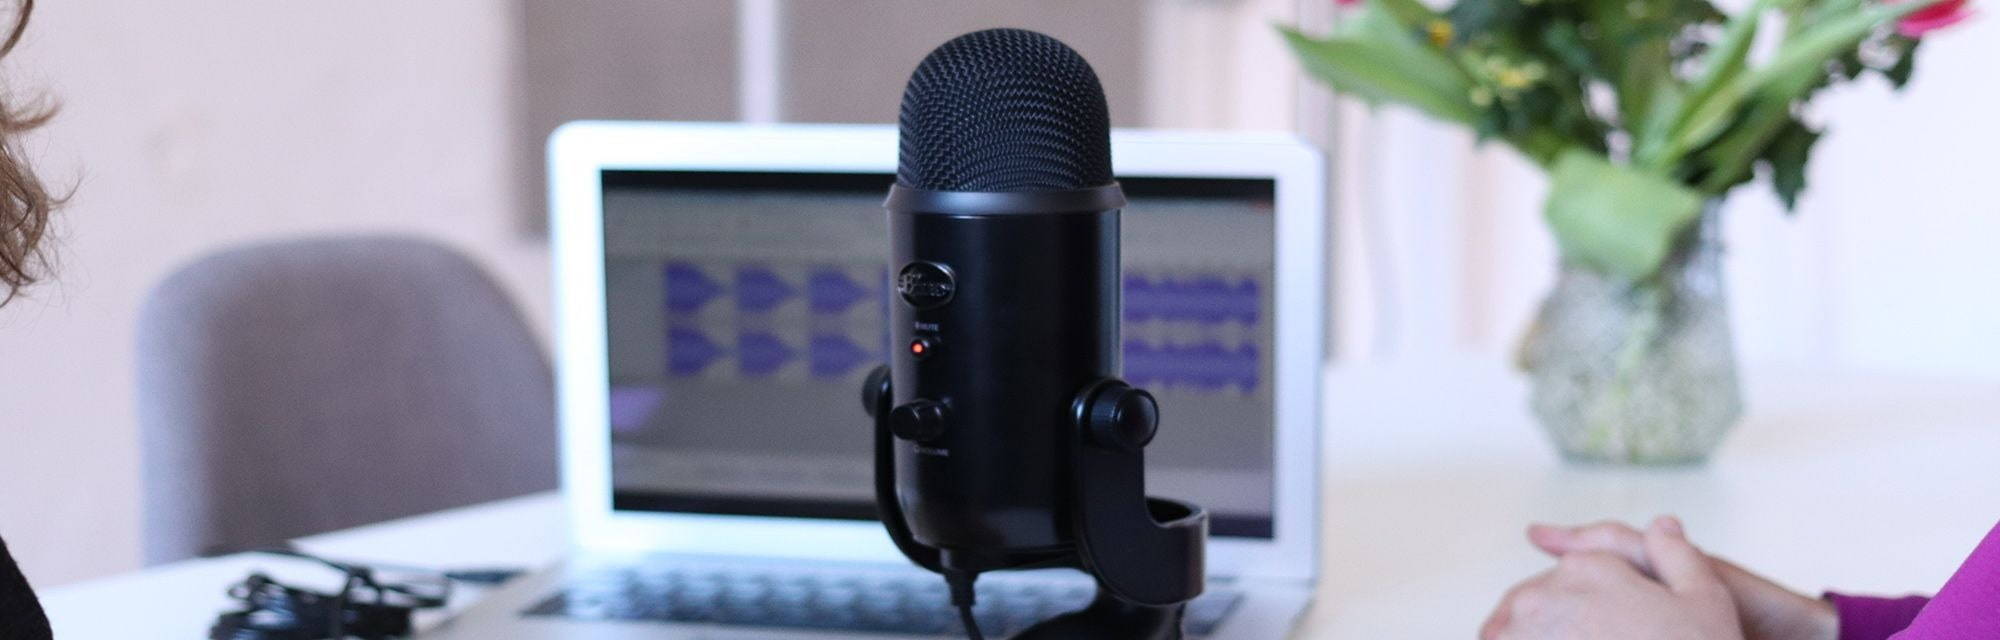 Microphone on desk in front of a laptop